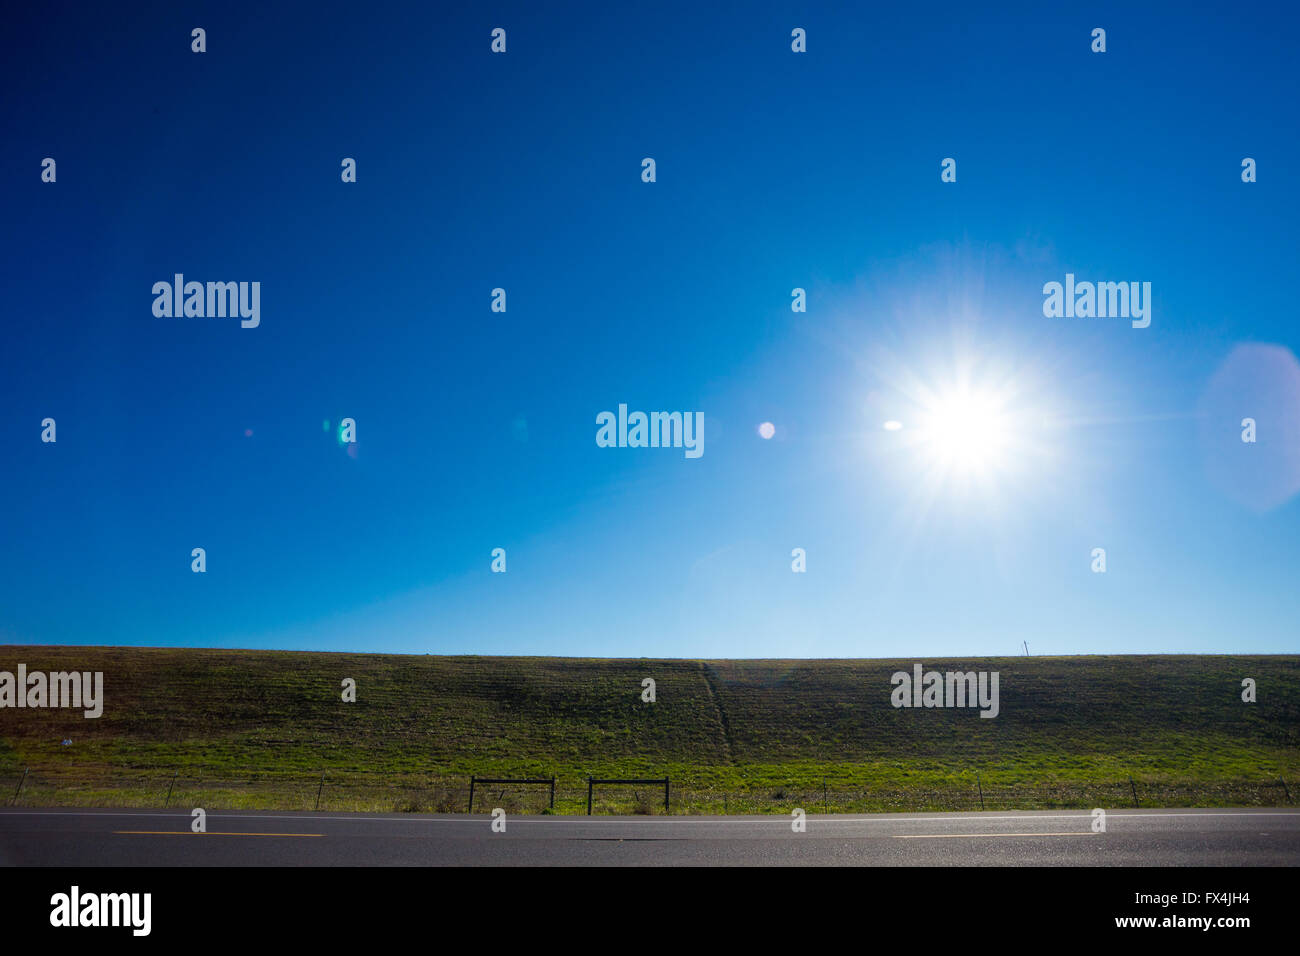 The bright sun in the blue sky causes this great sun flare along a dam and a road for a unique abstract nature sky landscape in Stock Photo